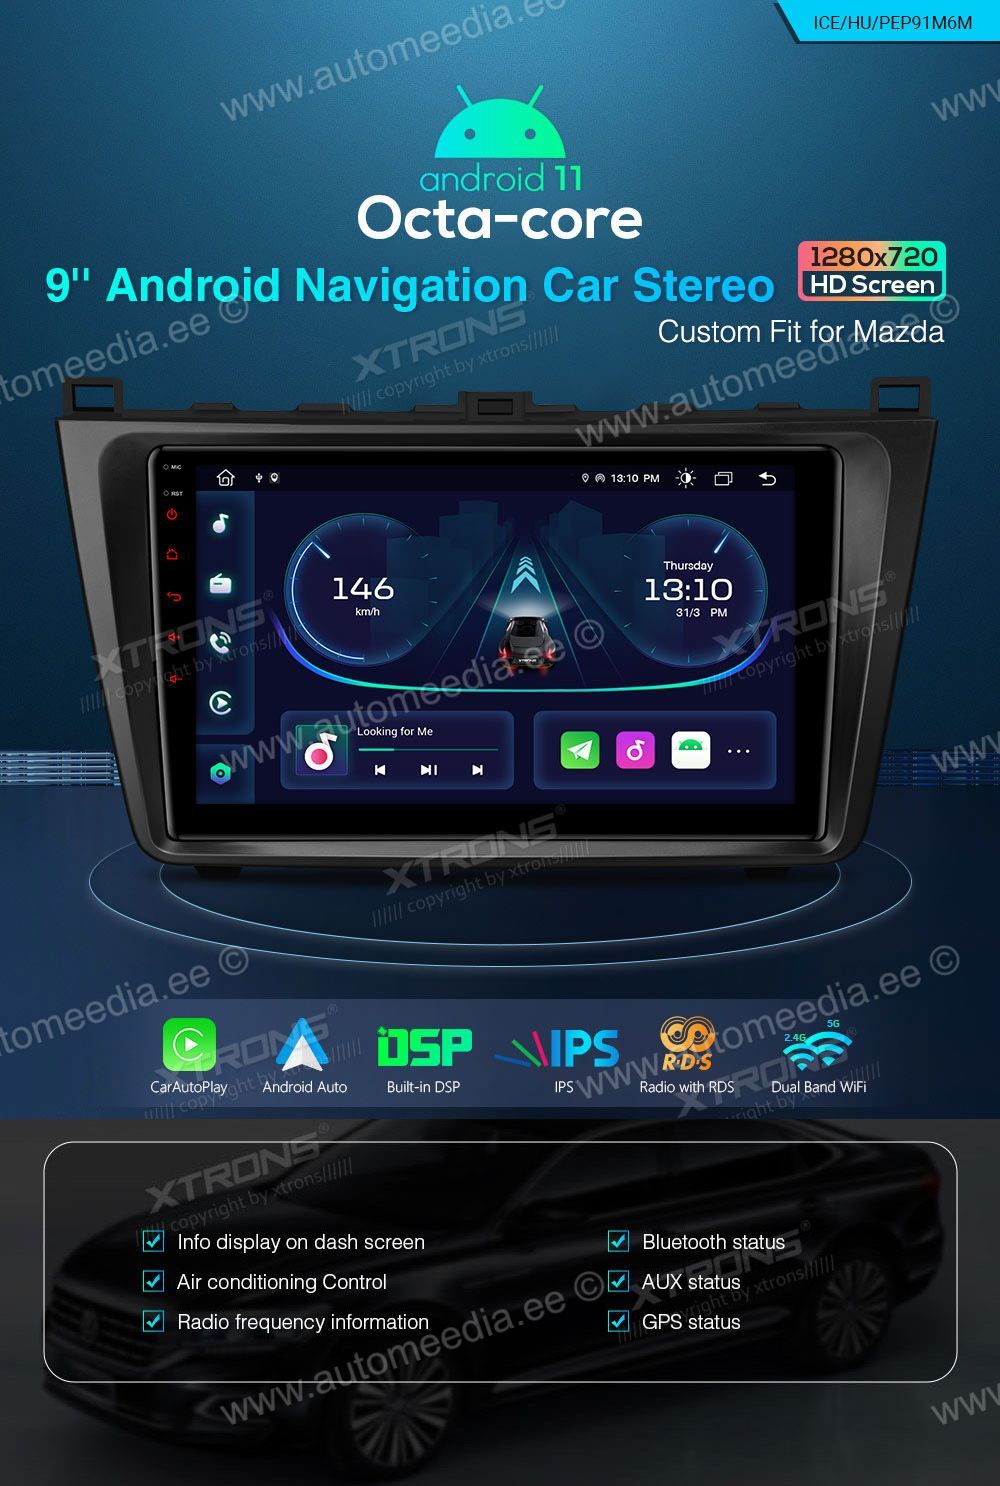 Mazda 6 (2008-2012)  XTRONS PEP91M6M Car multimedia GPS player with Custom Fit Design